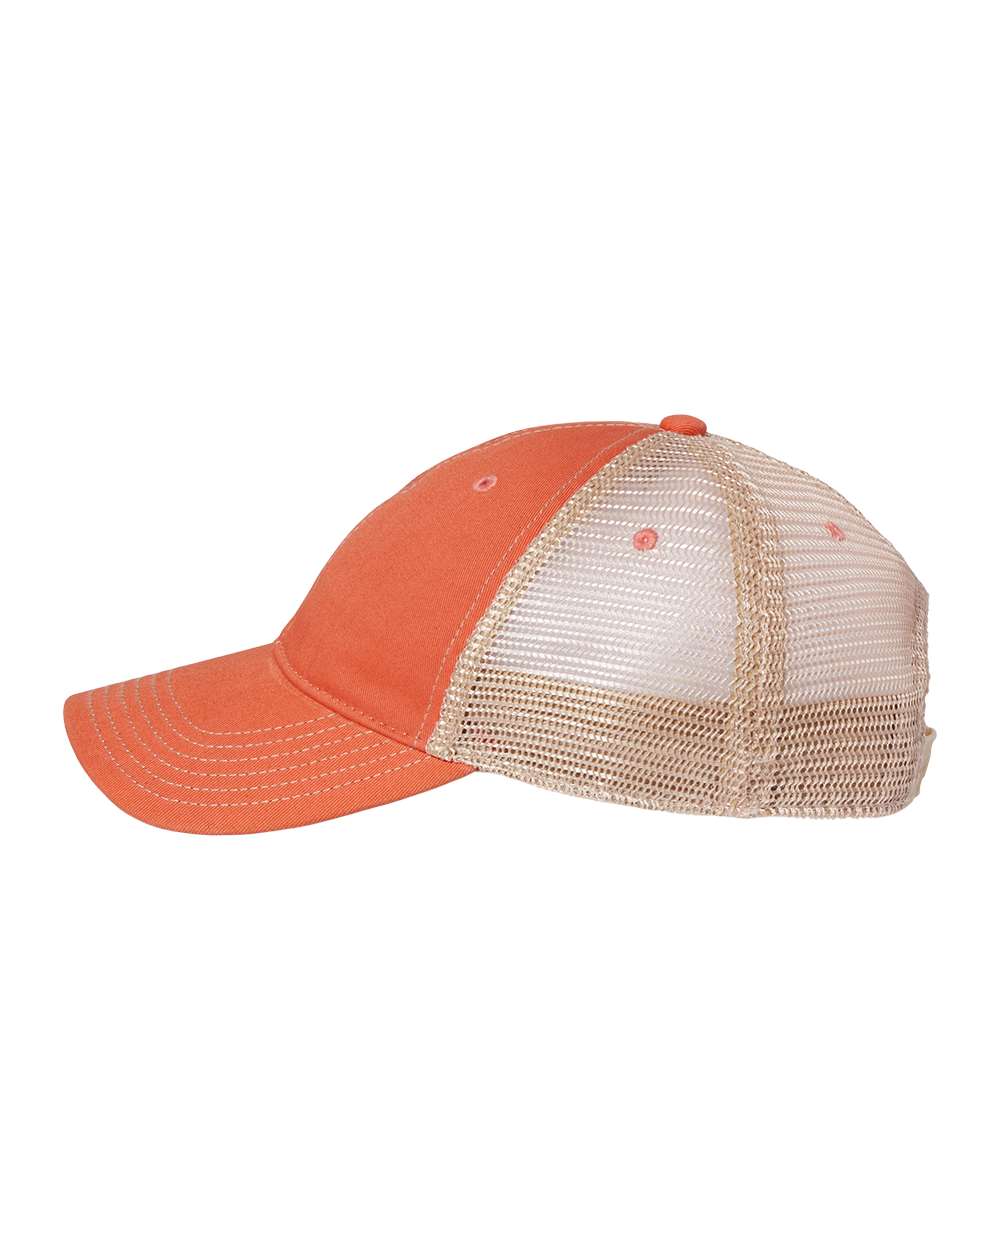 Side view of LEGACY OFA custom hat in coral and khaki